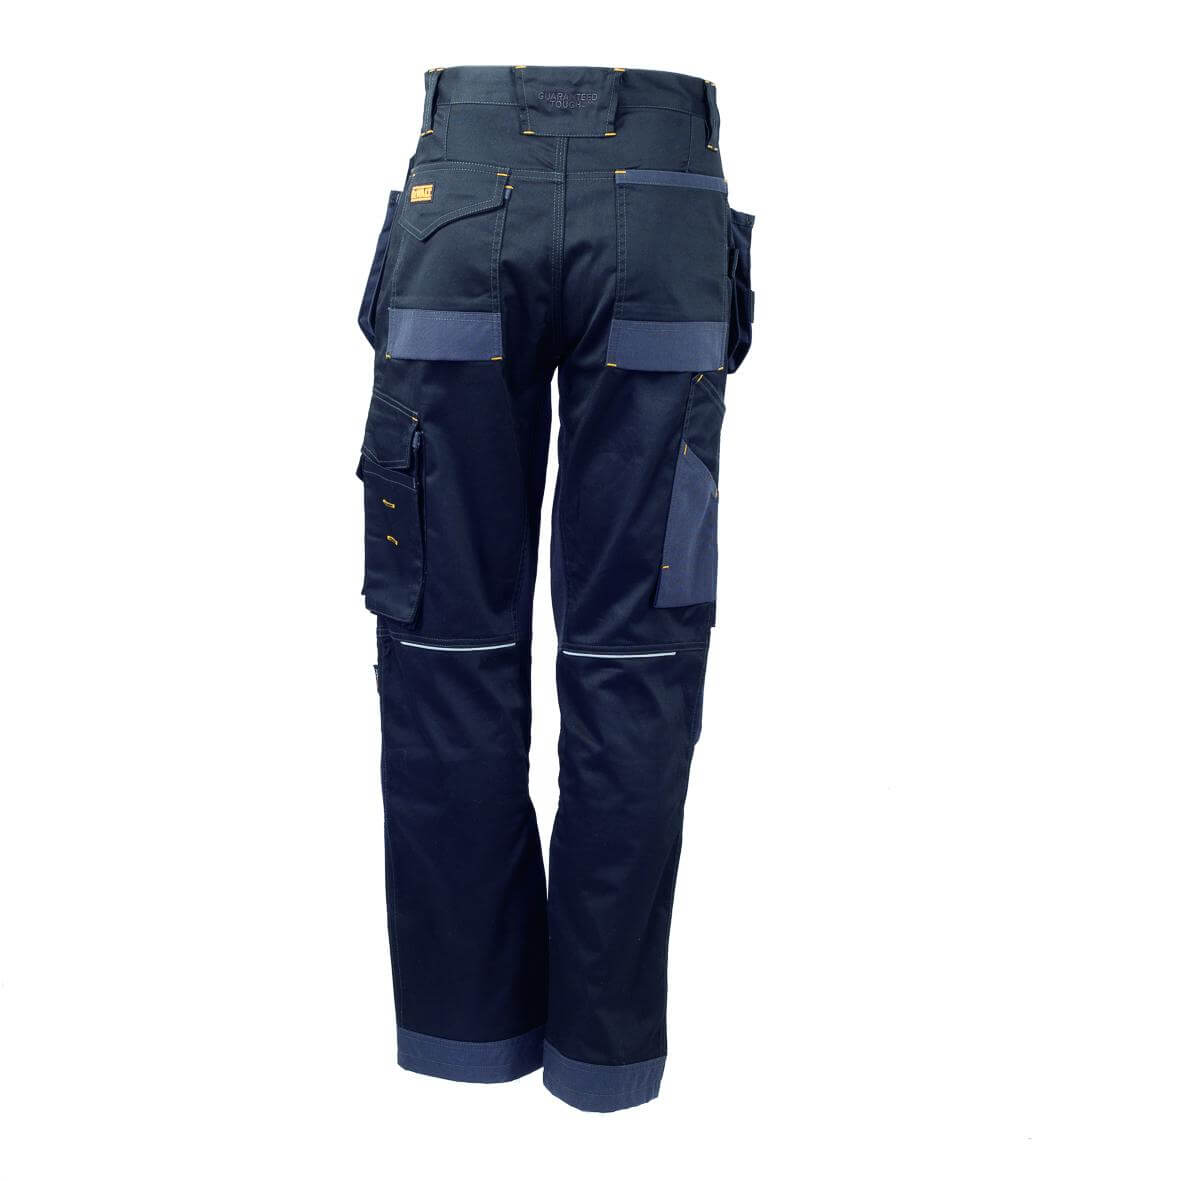 Snickers 6202 RuffWork Holster Pockets Work Trousers - Navy/Black available  online - Caulfield Industrial